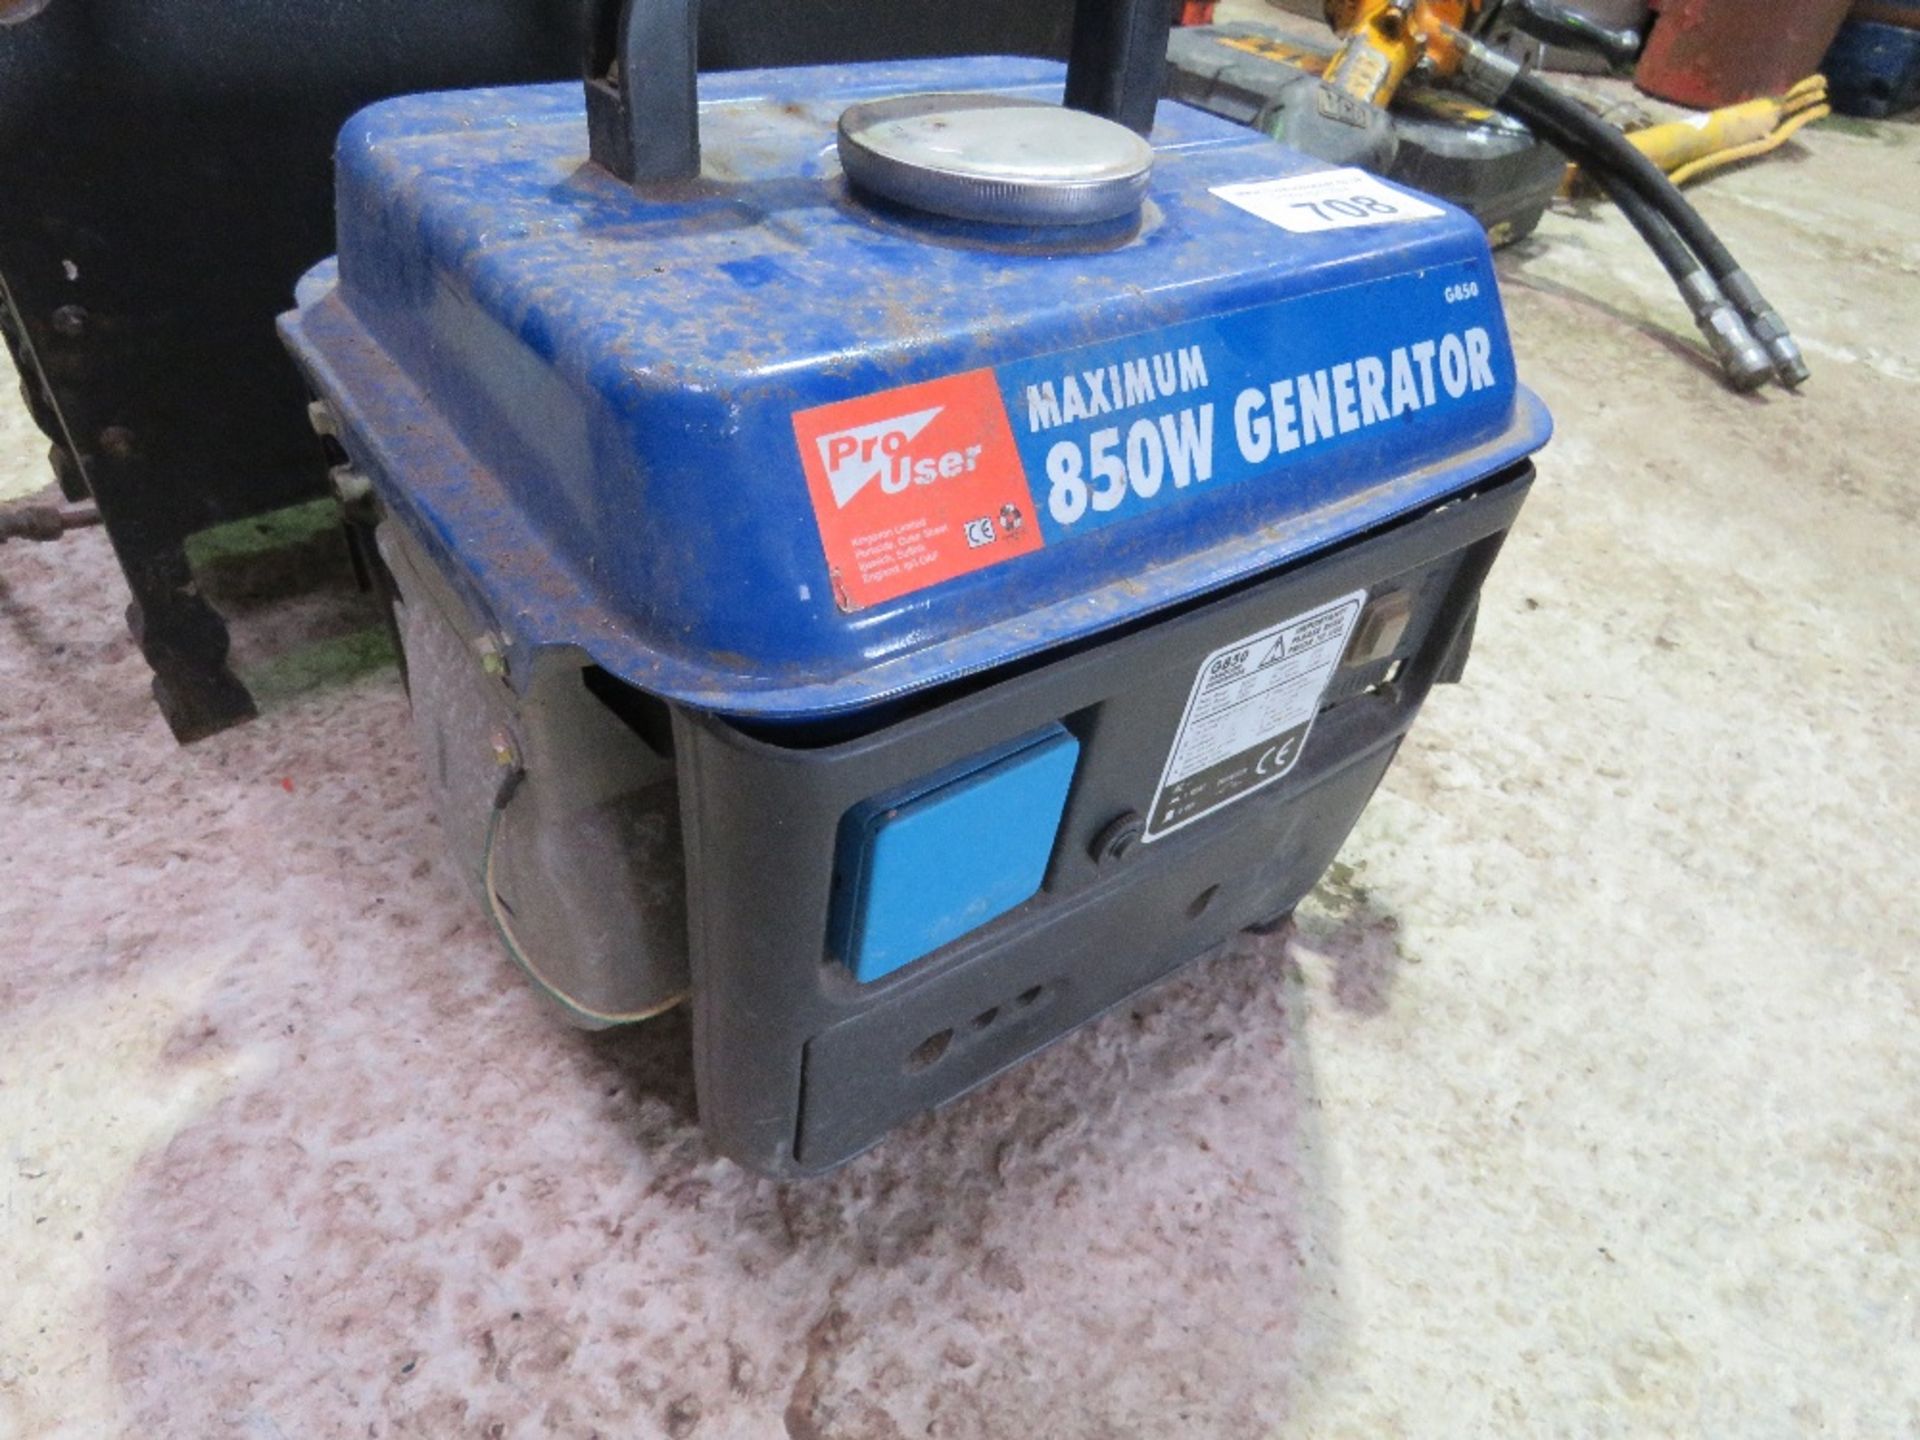 PETROL ENGINED 850 WATT GENERATOR......THIS LOT IS SOLD UNDER THE AUCTIONEERS MARGIN SCHEME, THEREFO